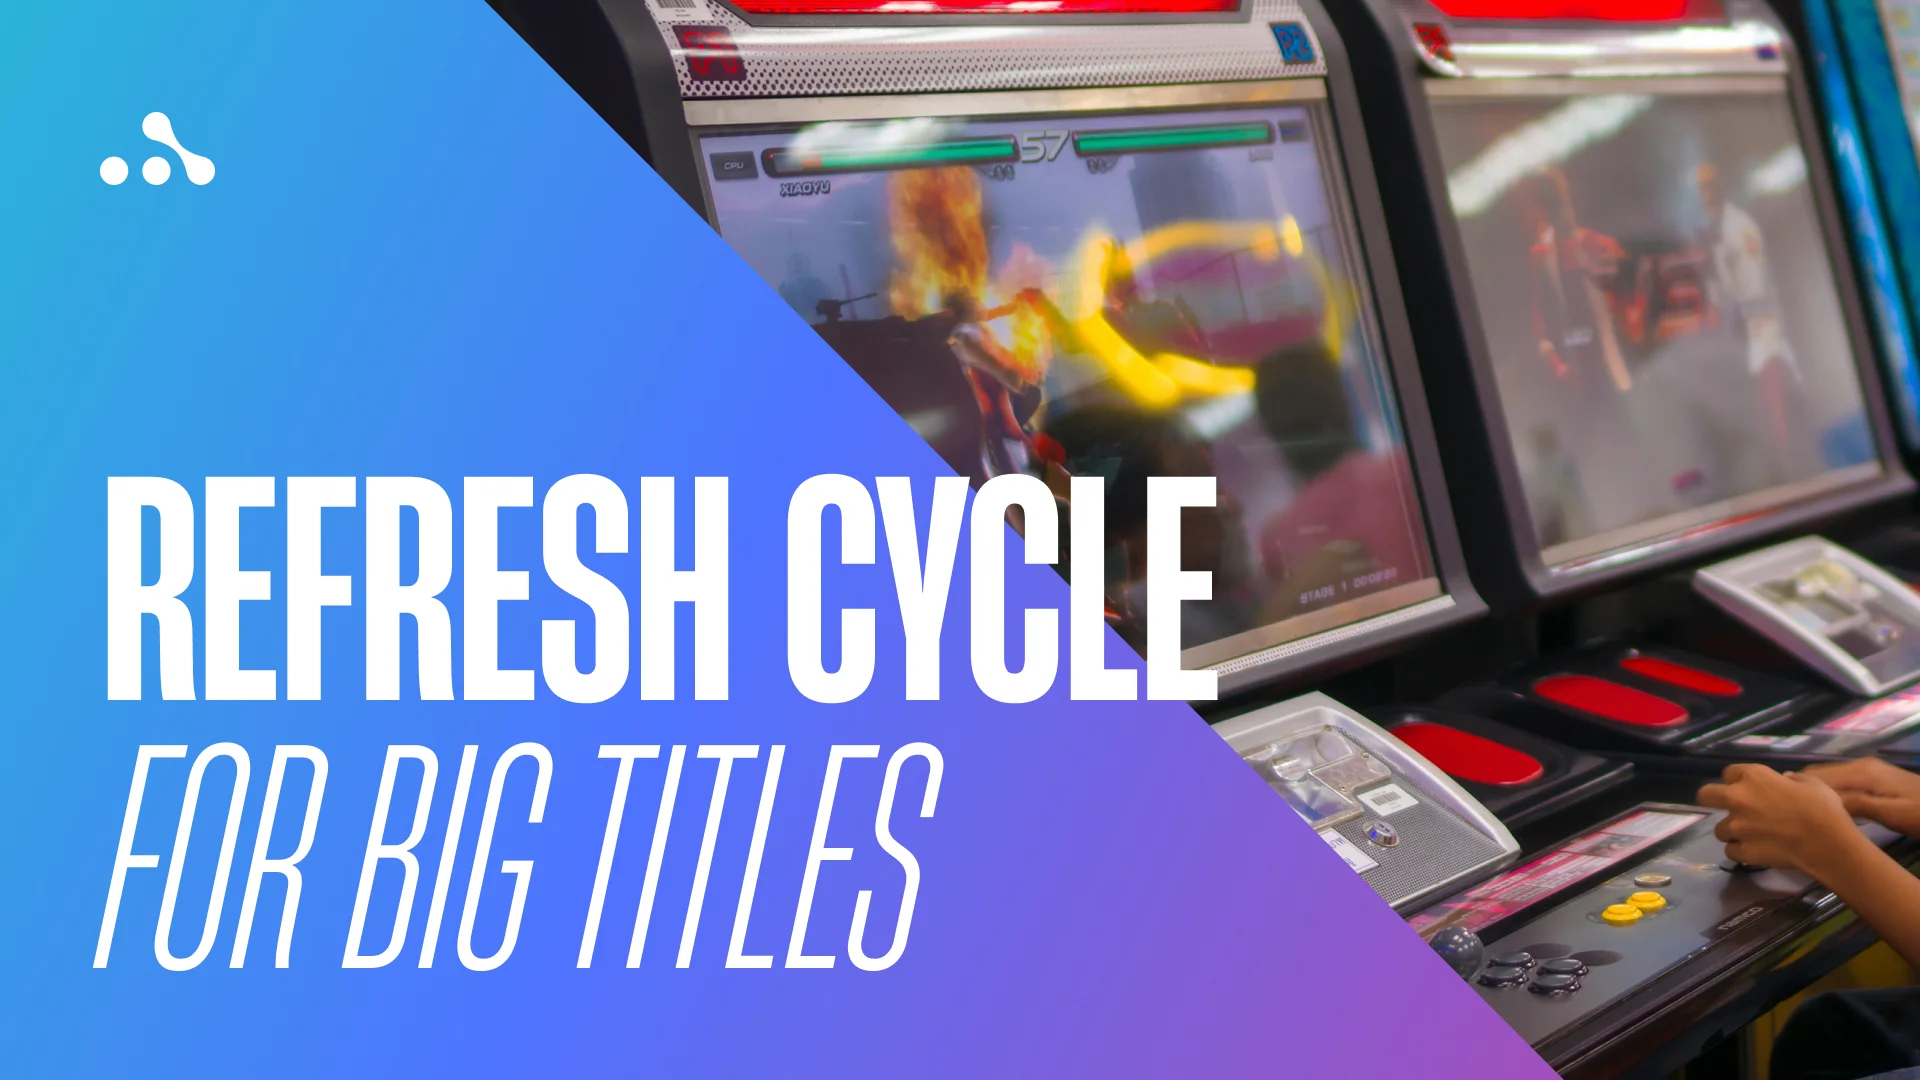 Refresh Cycle for Big Titles. Credit: WePlay Holding